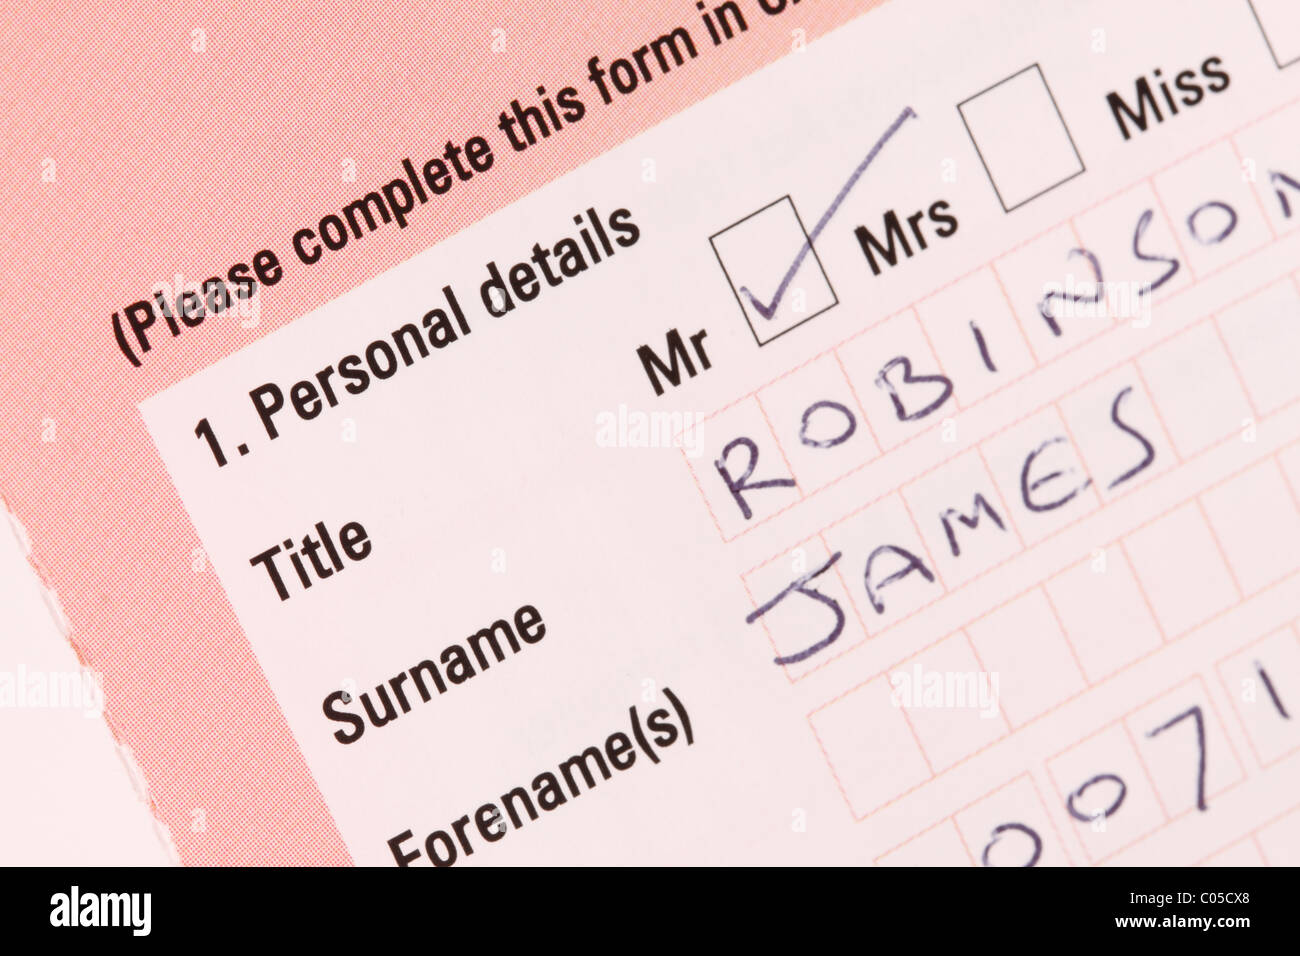 Personal data information application form name details Stock Photo